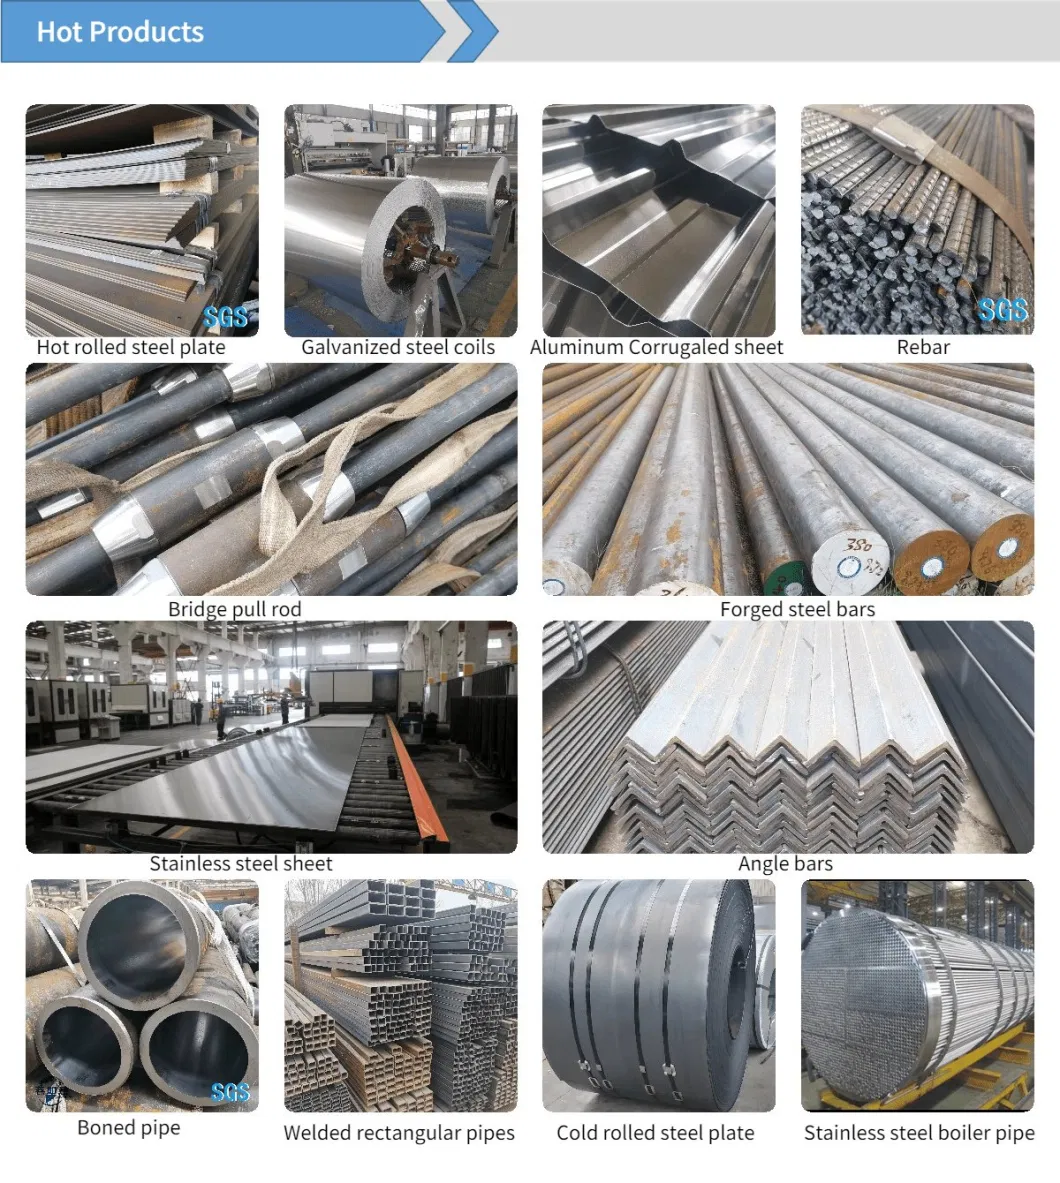 GB/T3091 Q235 16mnr Q460 Big Size Diameter Thick All Hot Cold Reel Coiled Cone-Shaped Circular Arc Board Plate Welded Welding Steel Pipe Reducing Pipe